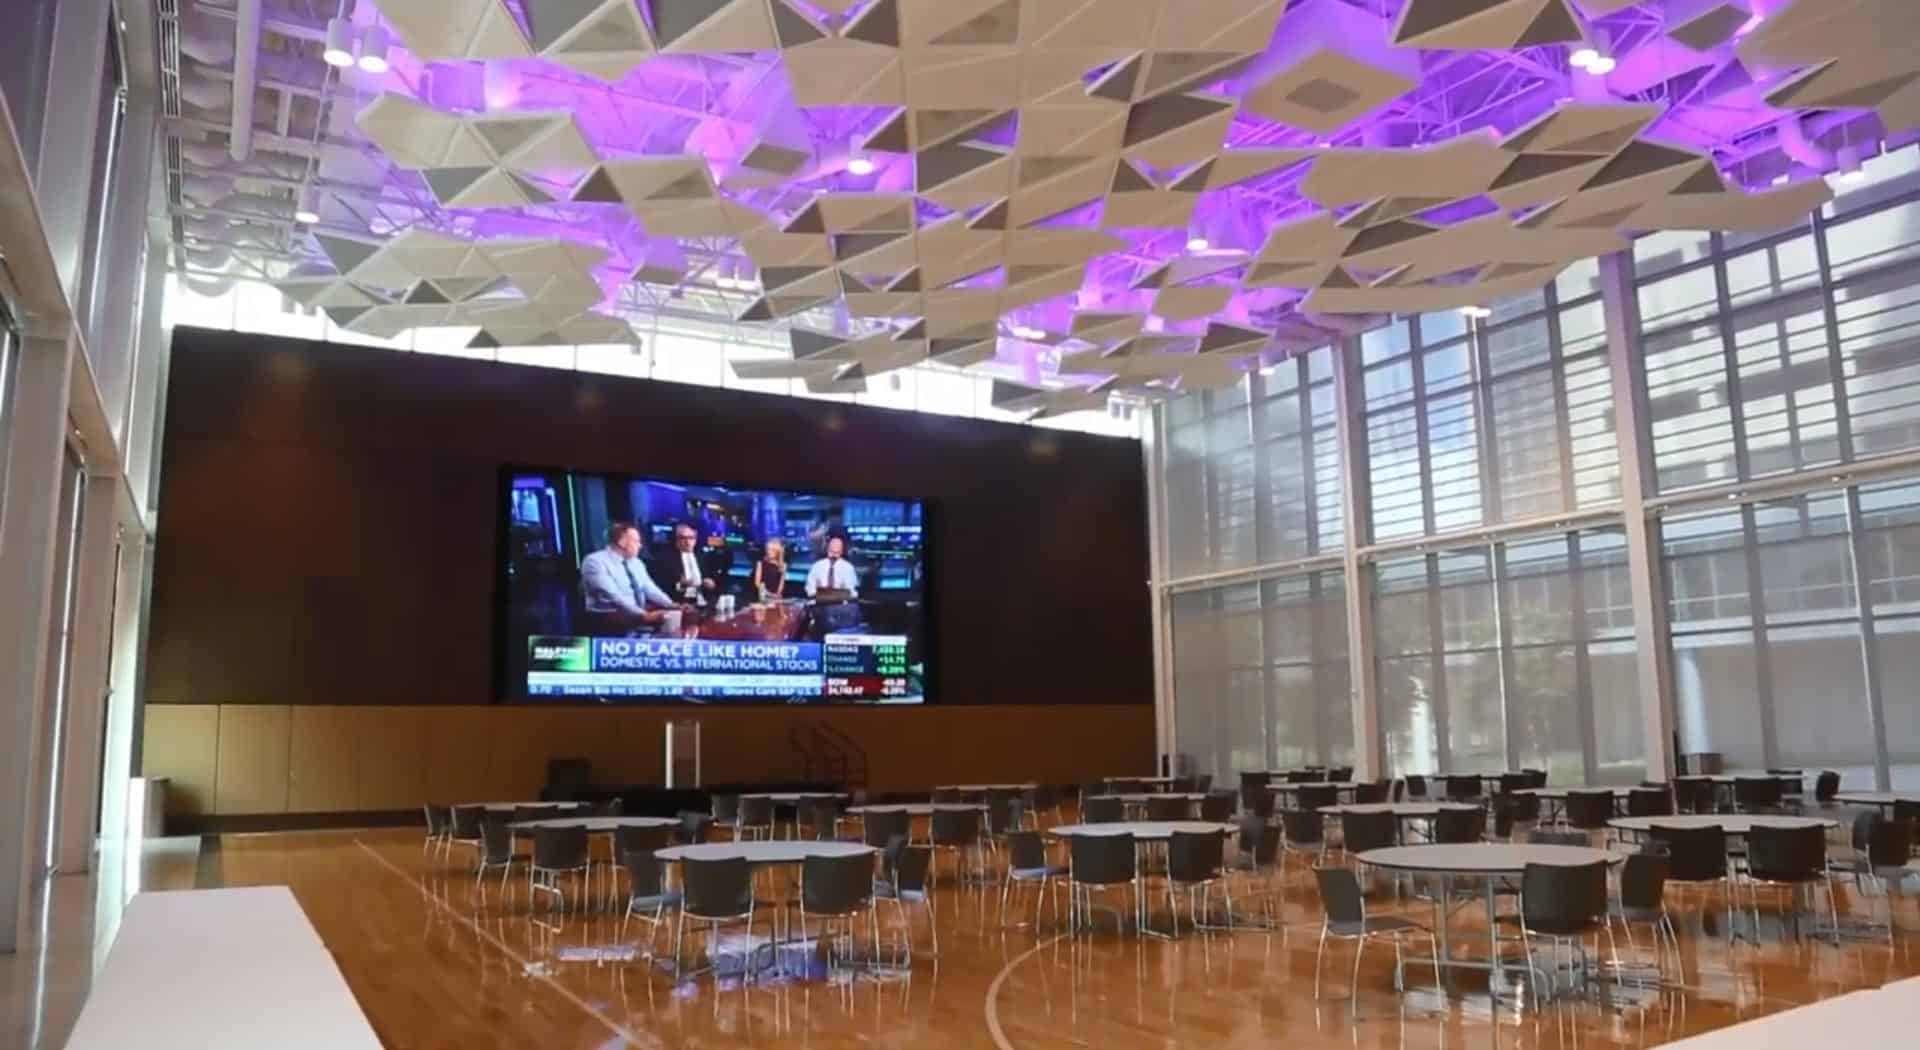 Colorful fiber optic lighting in a conference room